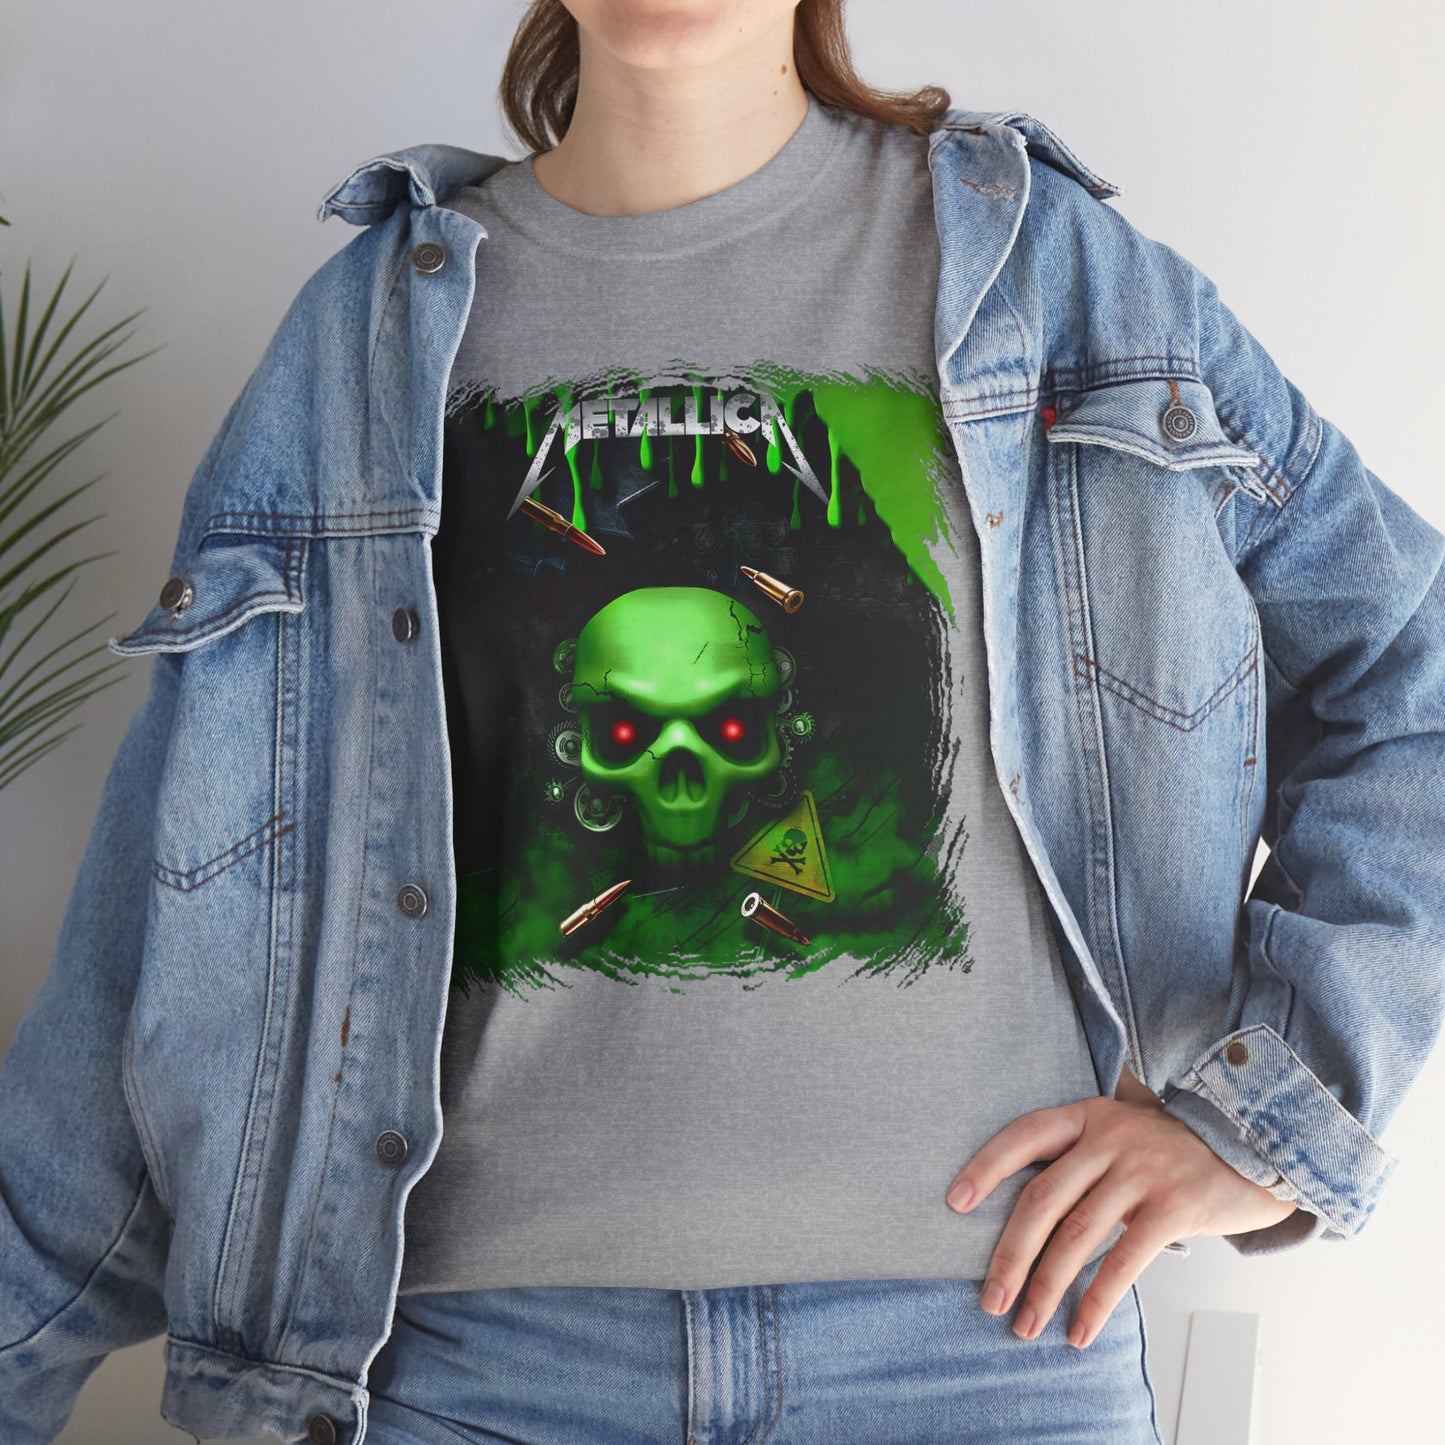 Metallica Bullets and Skull High Quality Printed Unisex Heavy Cotton T-shirt